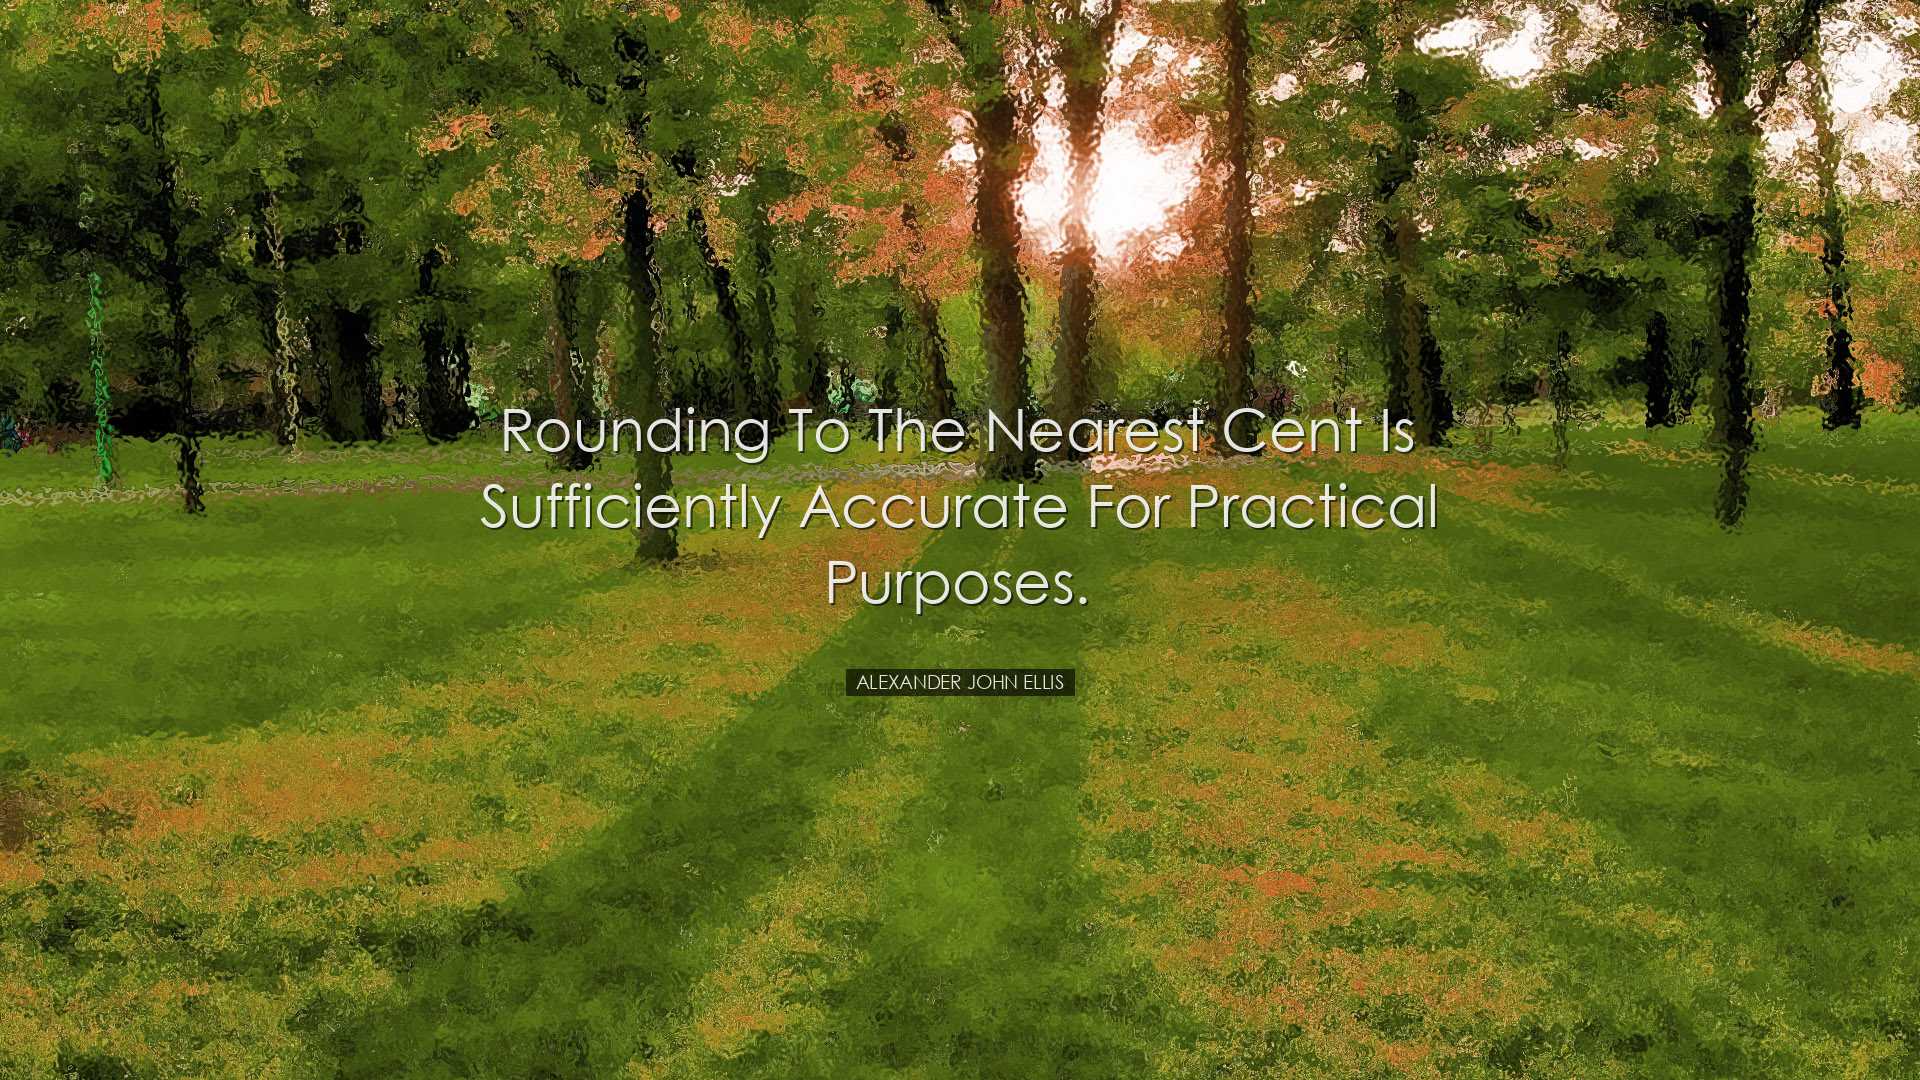 Rounding to the nearest cent is sufficiently accurate for practica